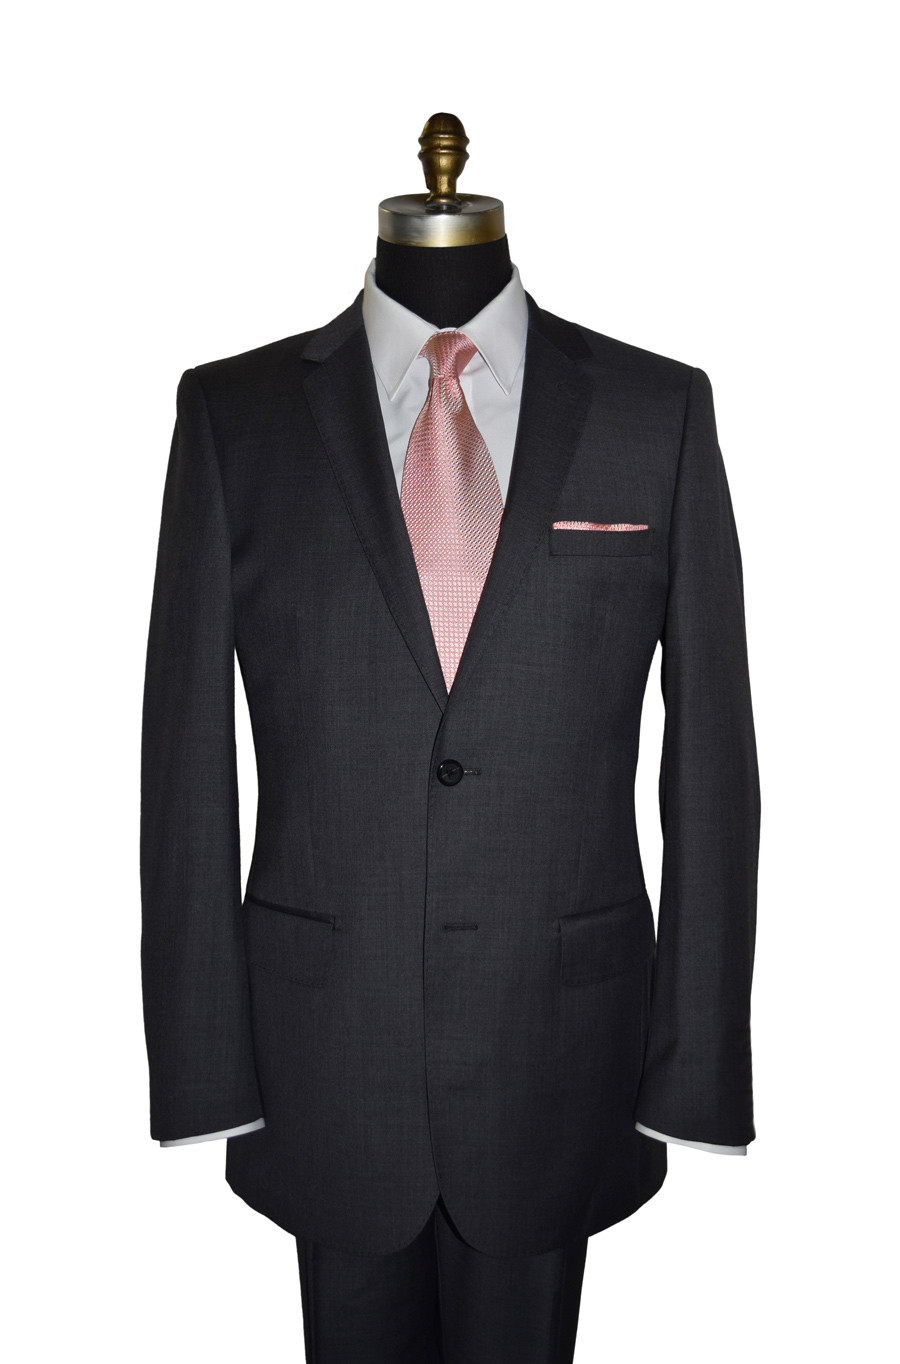 Charcoal Gray Suit - Cashmere and Super Fine Wool